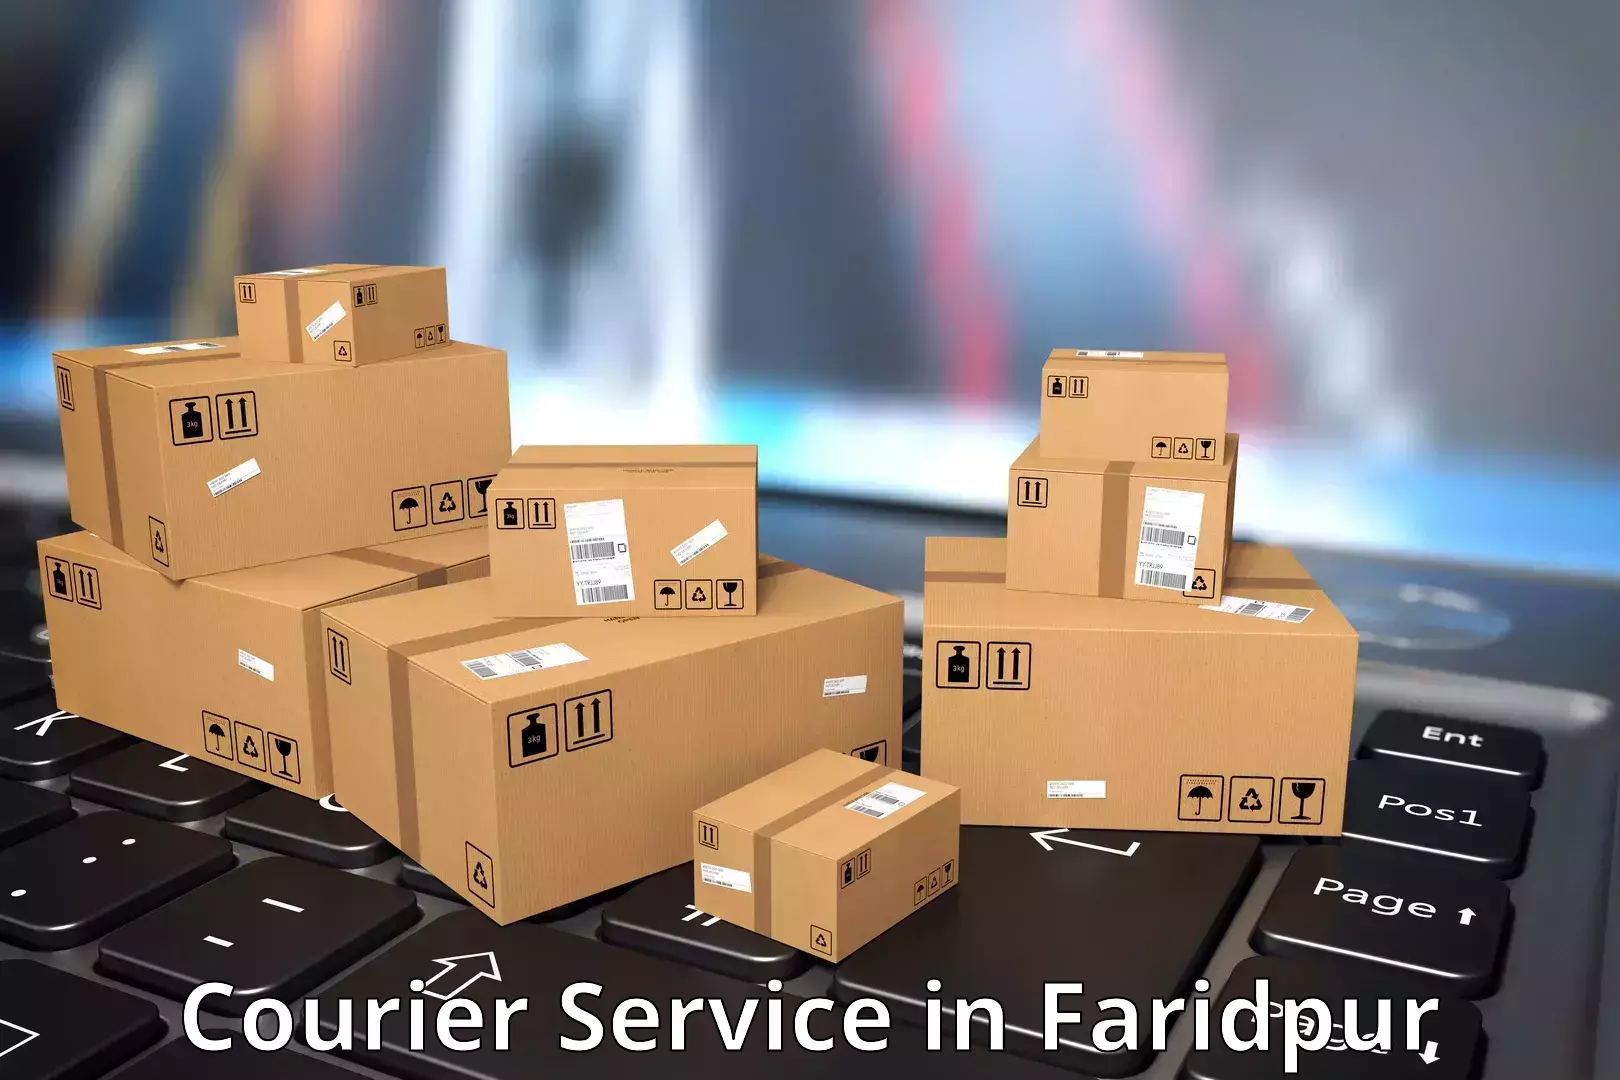 Express delivery capabilities in Faridpur